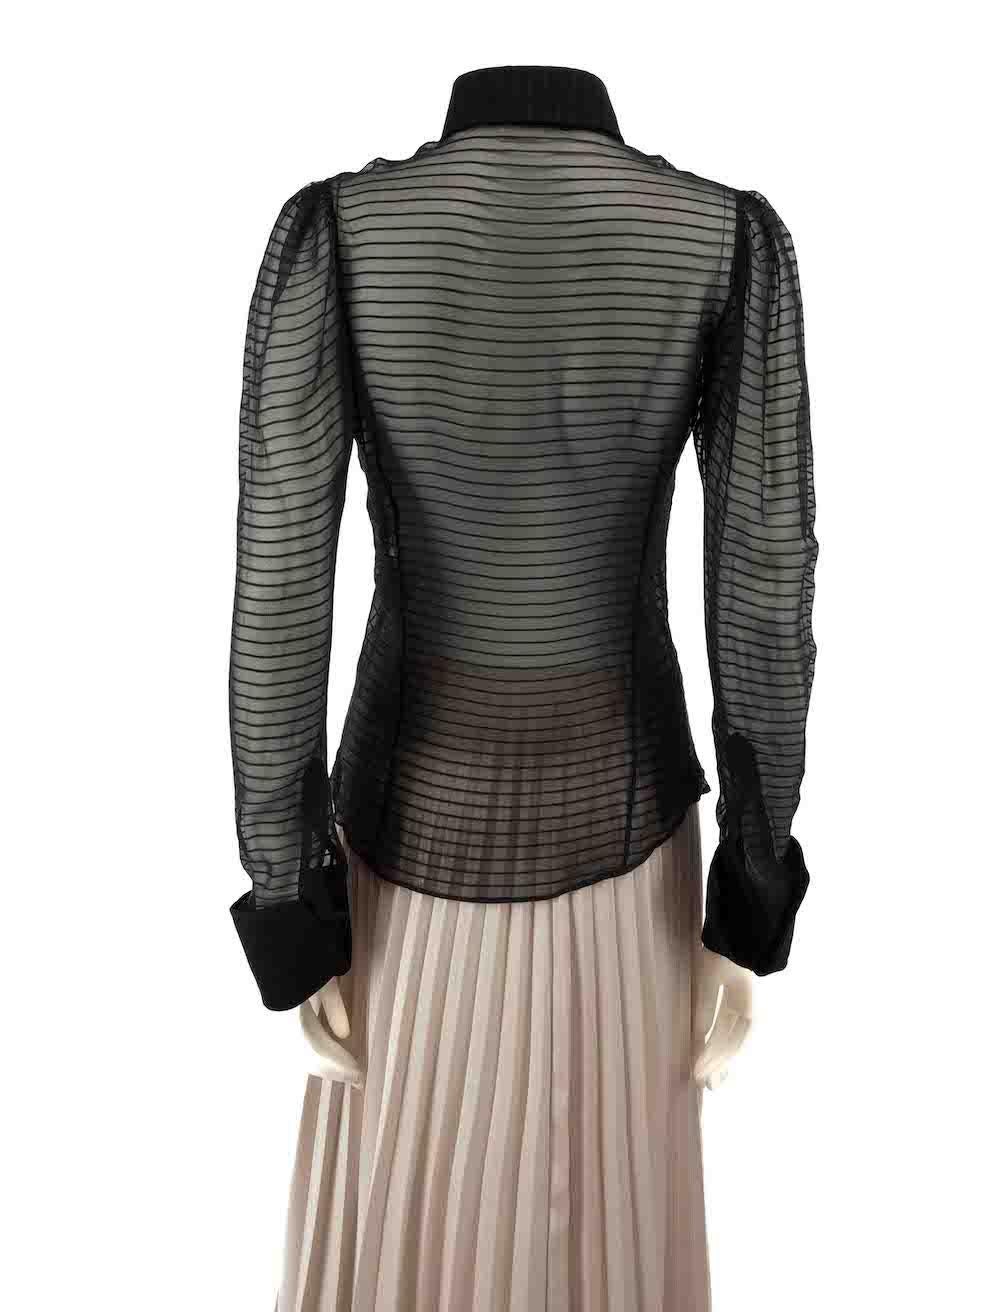 Stella McCartney Black Striped Sheer Blouse Size M In Good Condition For Sale In London, GB